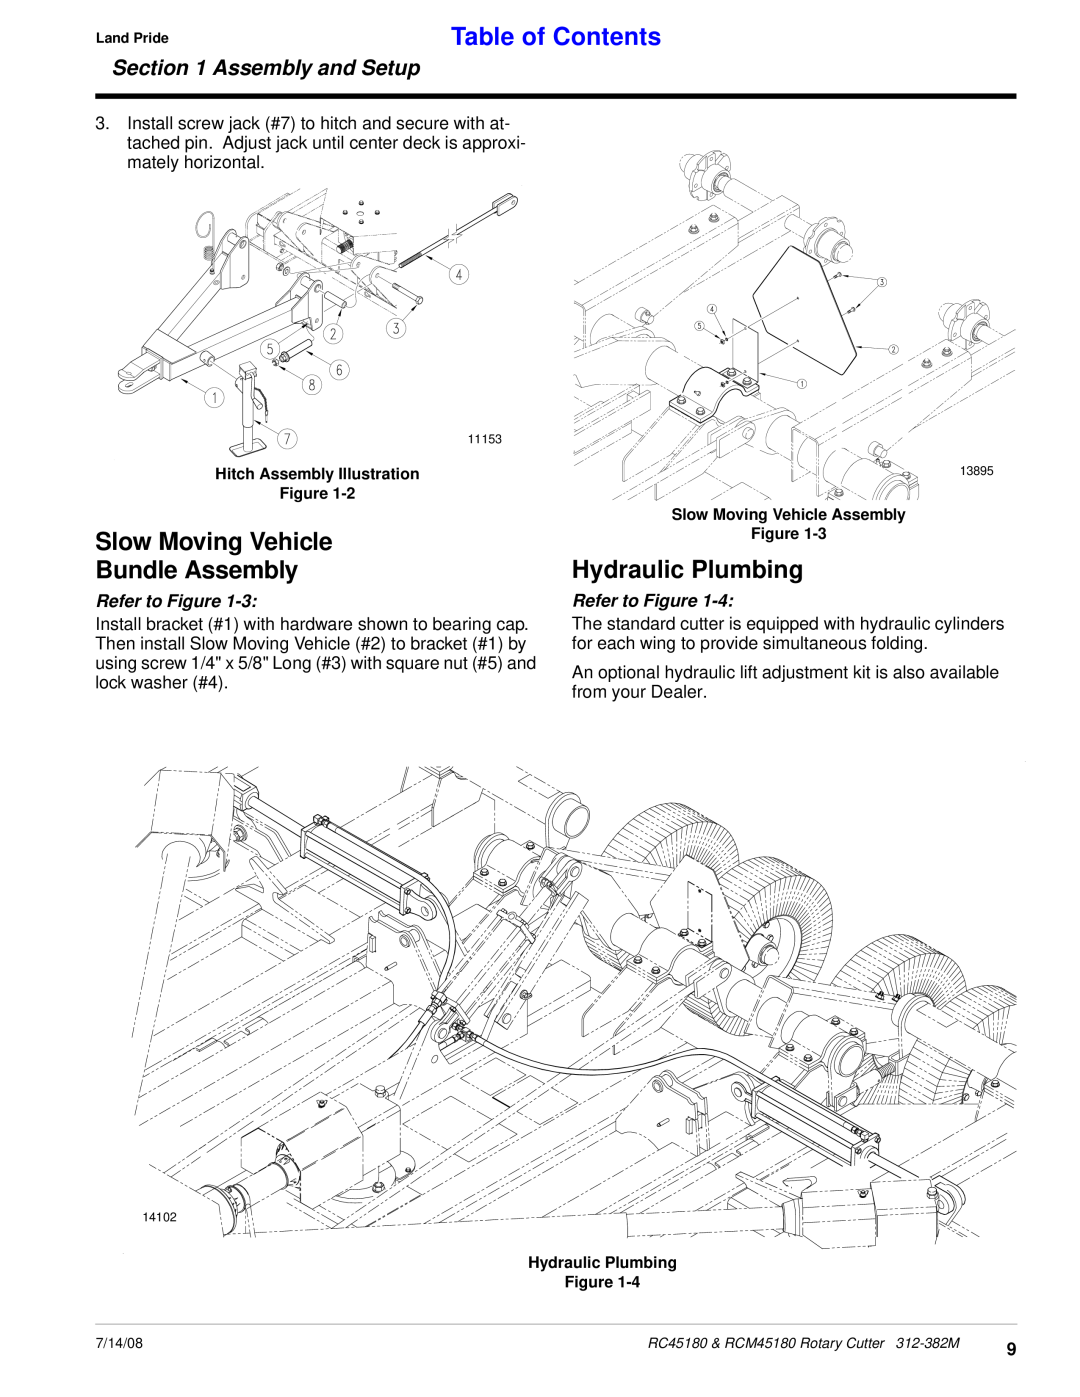 Land Pride RCM45180 manual Slow Moving Vehicle Bundle Assembly, Hydraulic Plumbing, Table of Contents, Assembly and Setup 